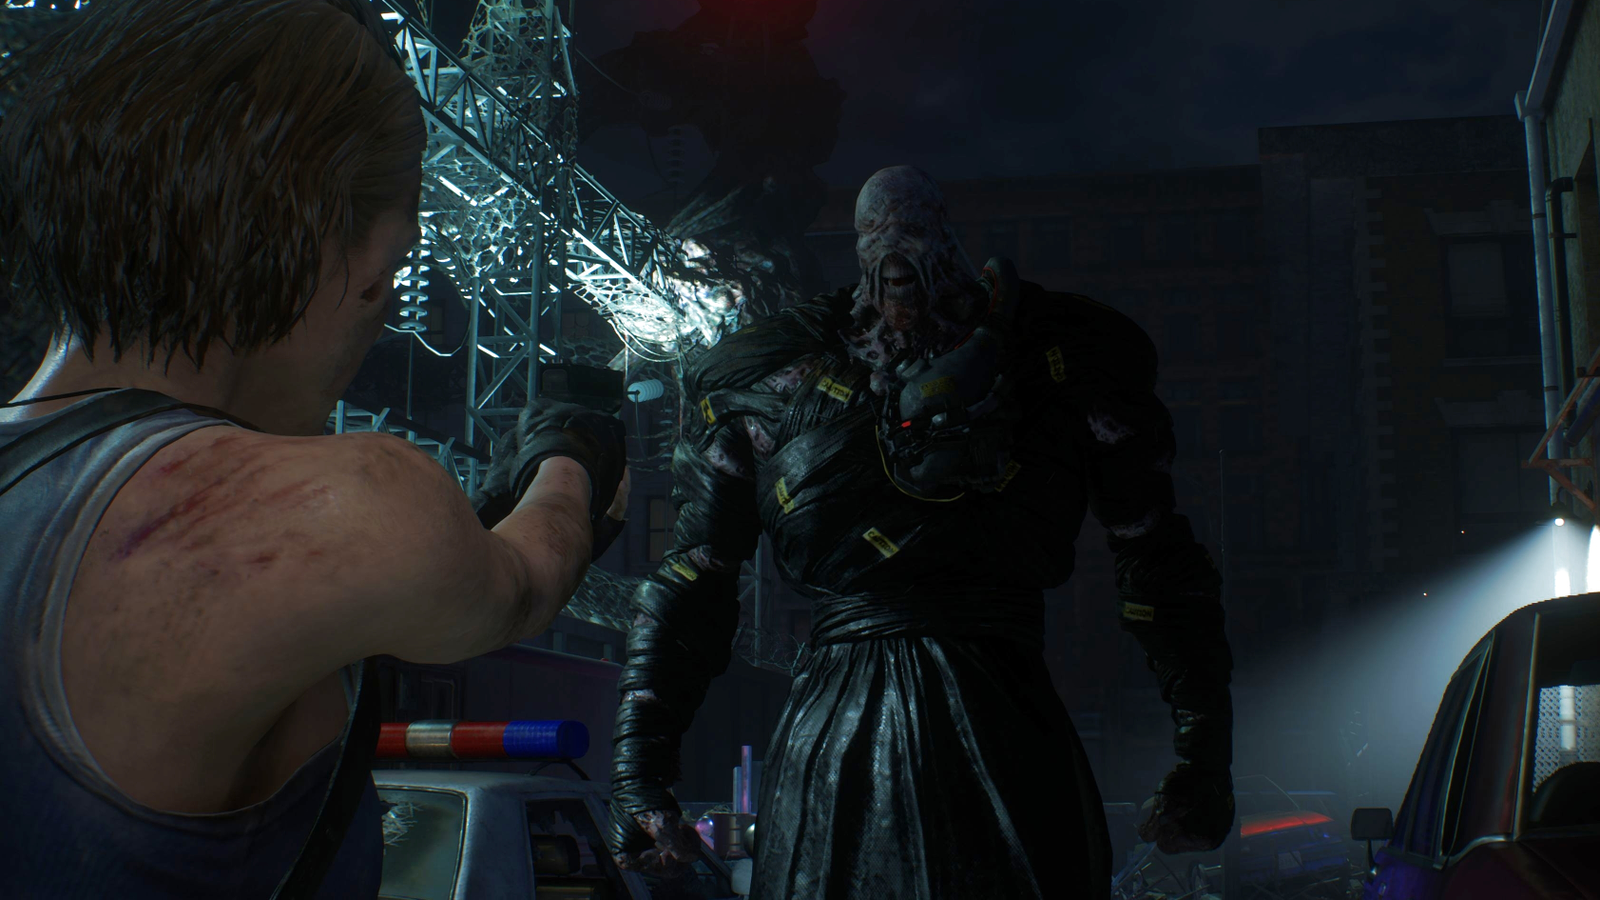 Resident Evil 3 Remake demo coming soon, new gameplay videos released - CNET